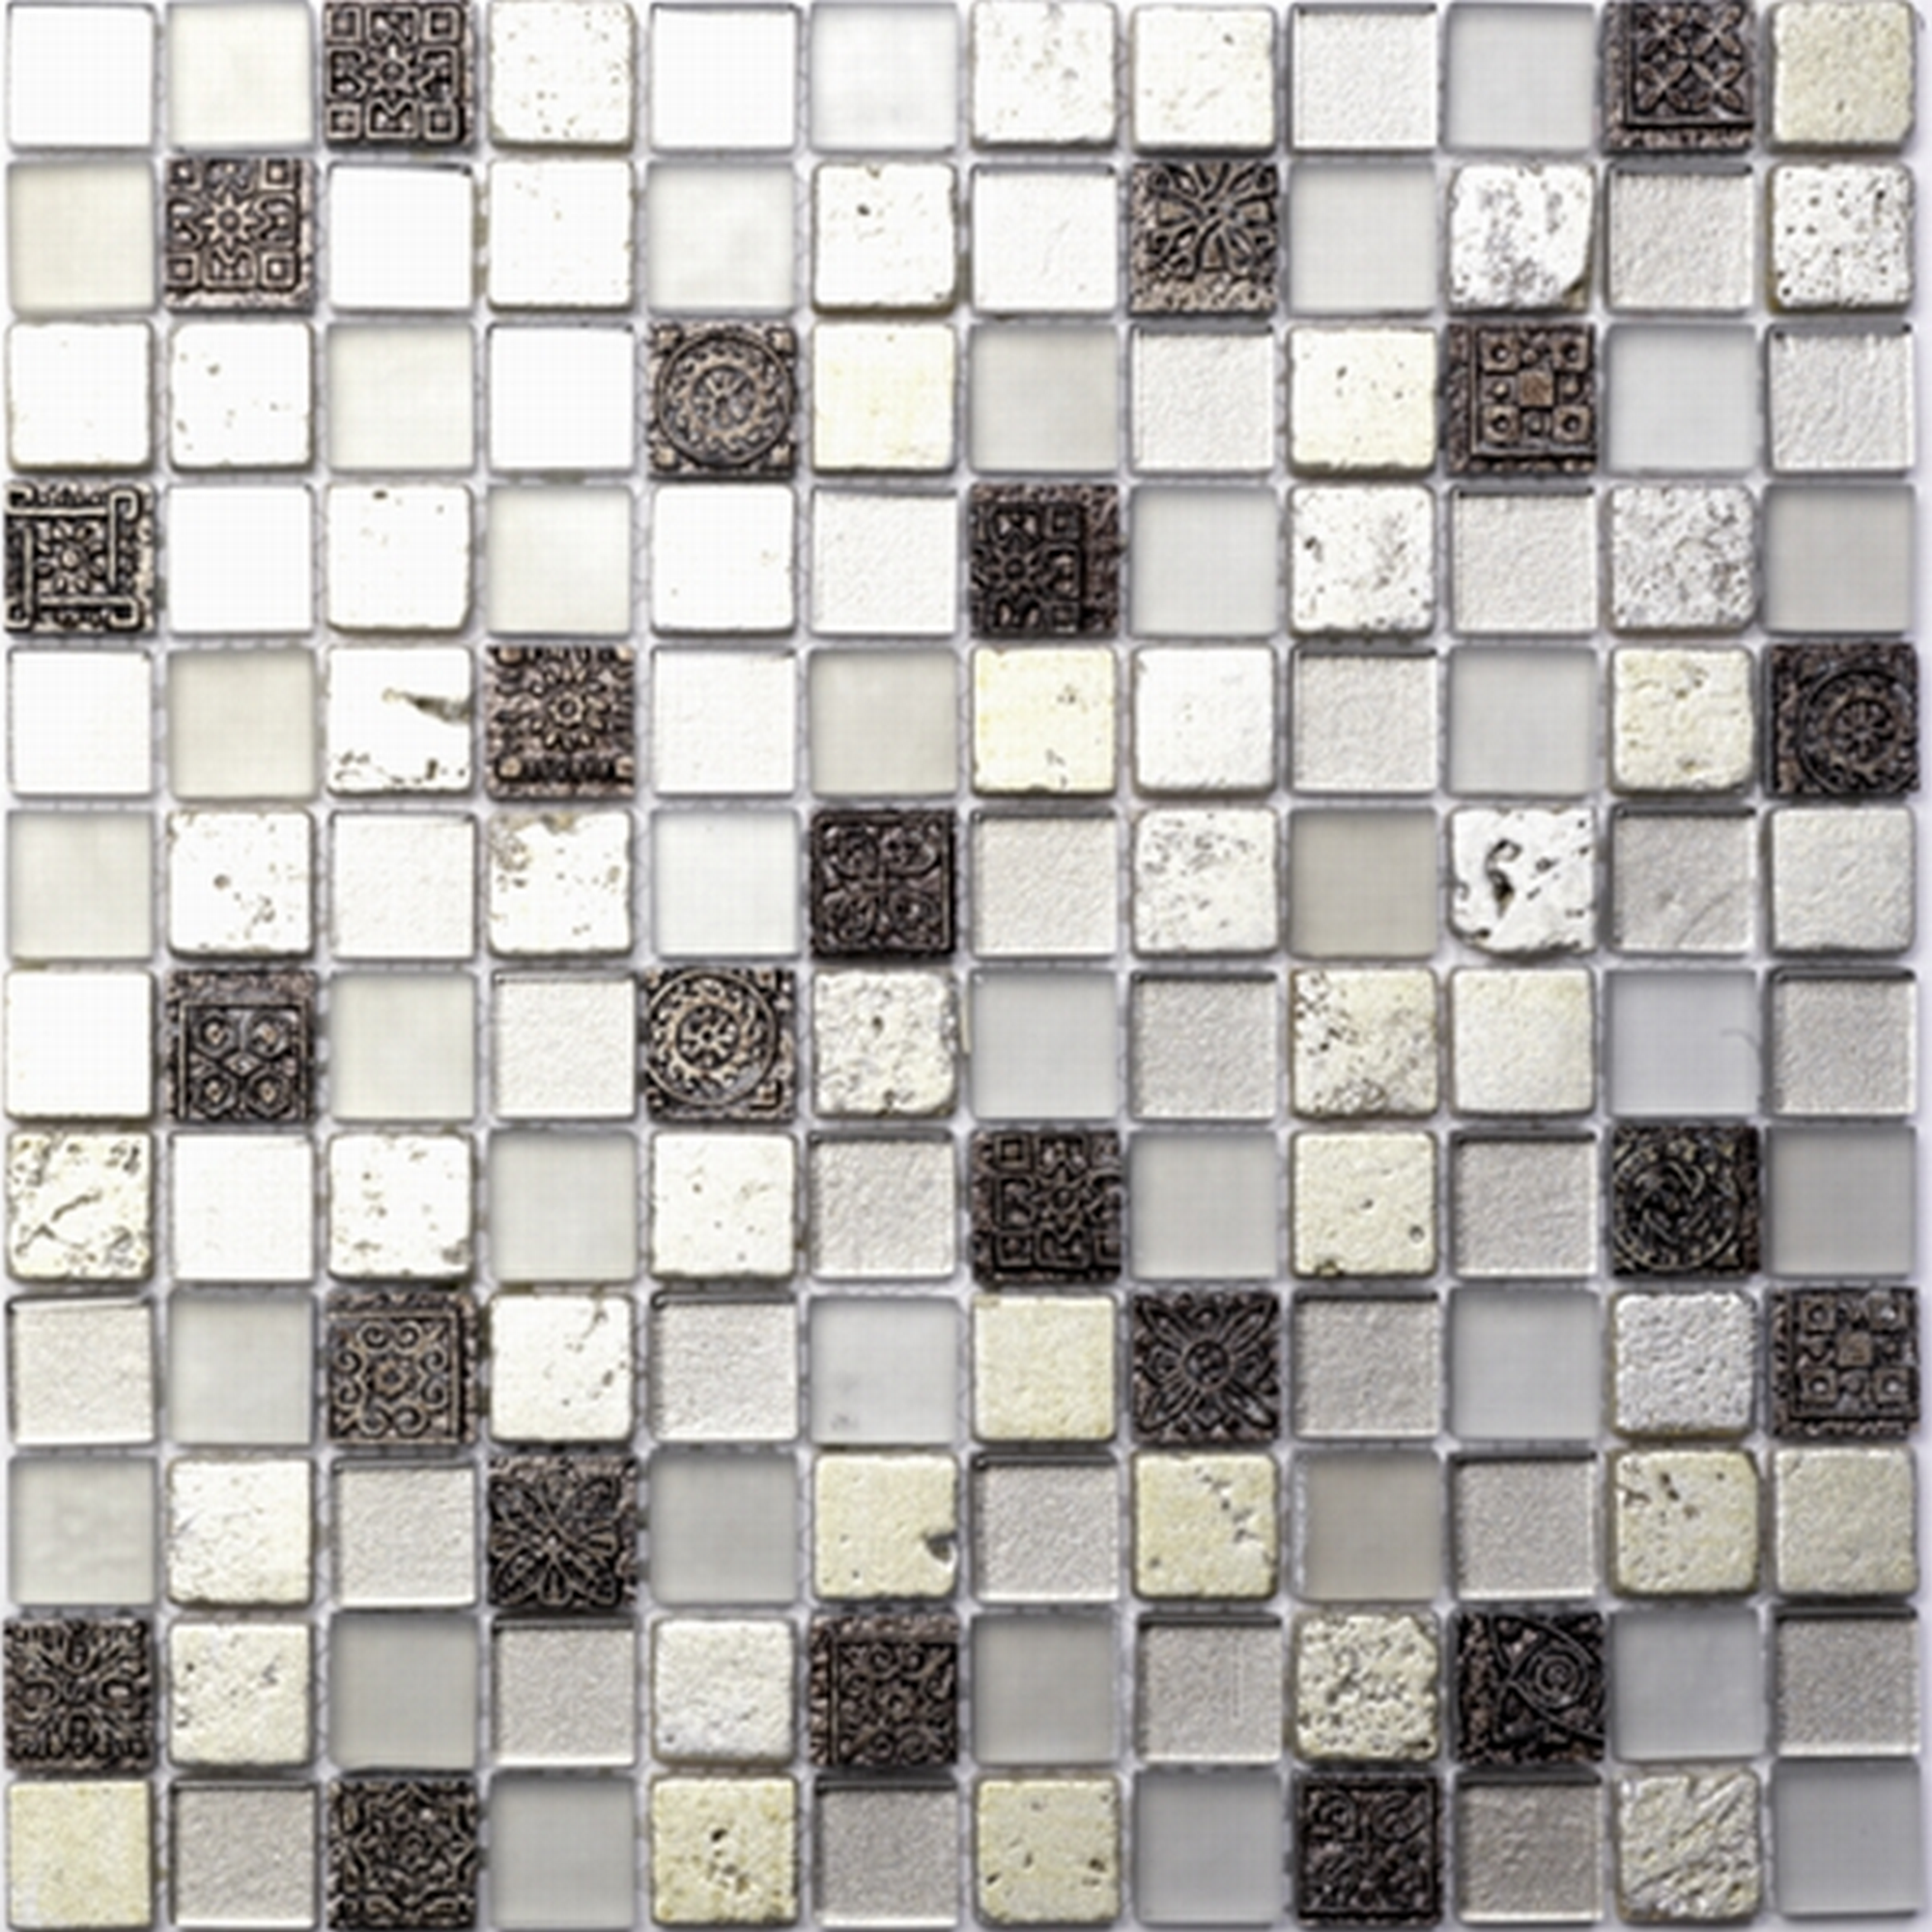 Mosaikfliese 'Miami' Materialmix grau-weiß 30 x 30 cm + product picture